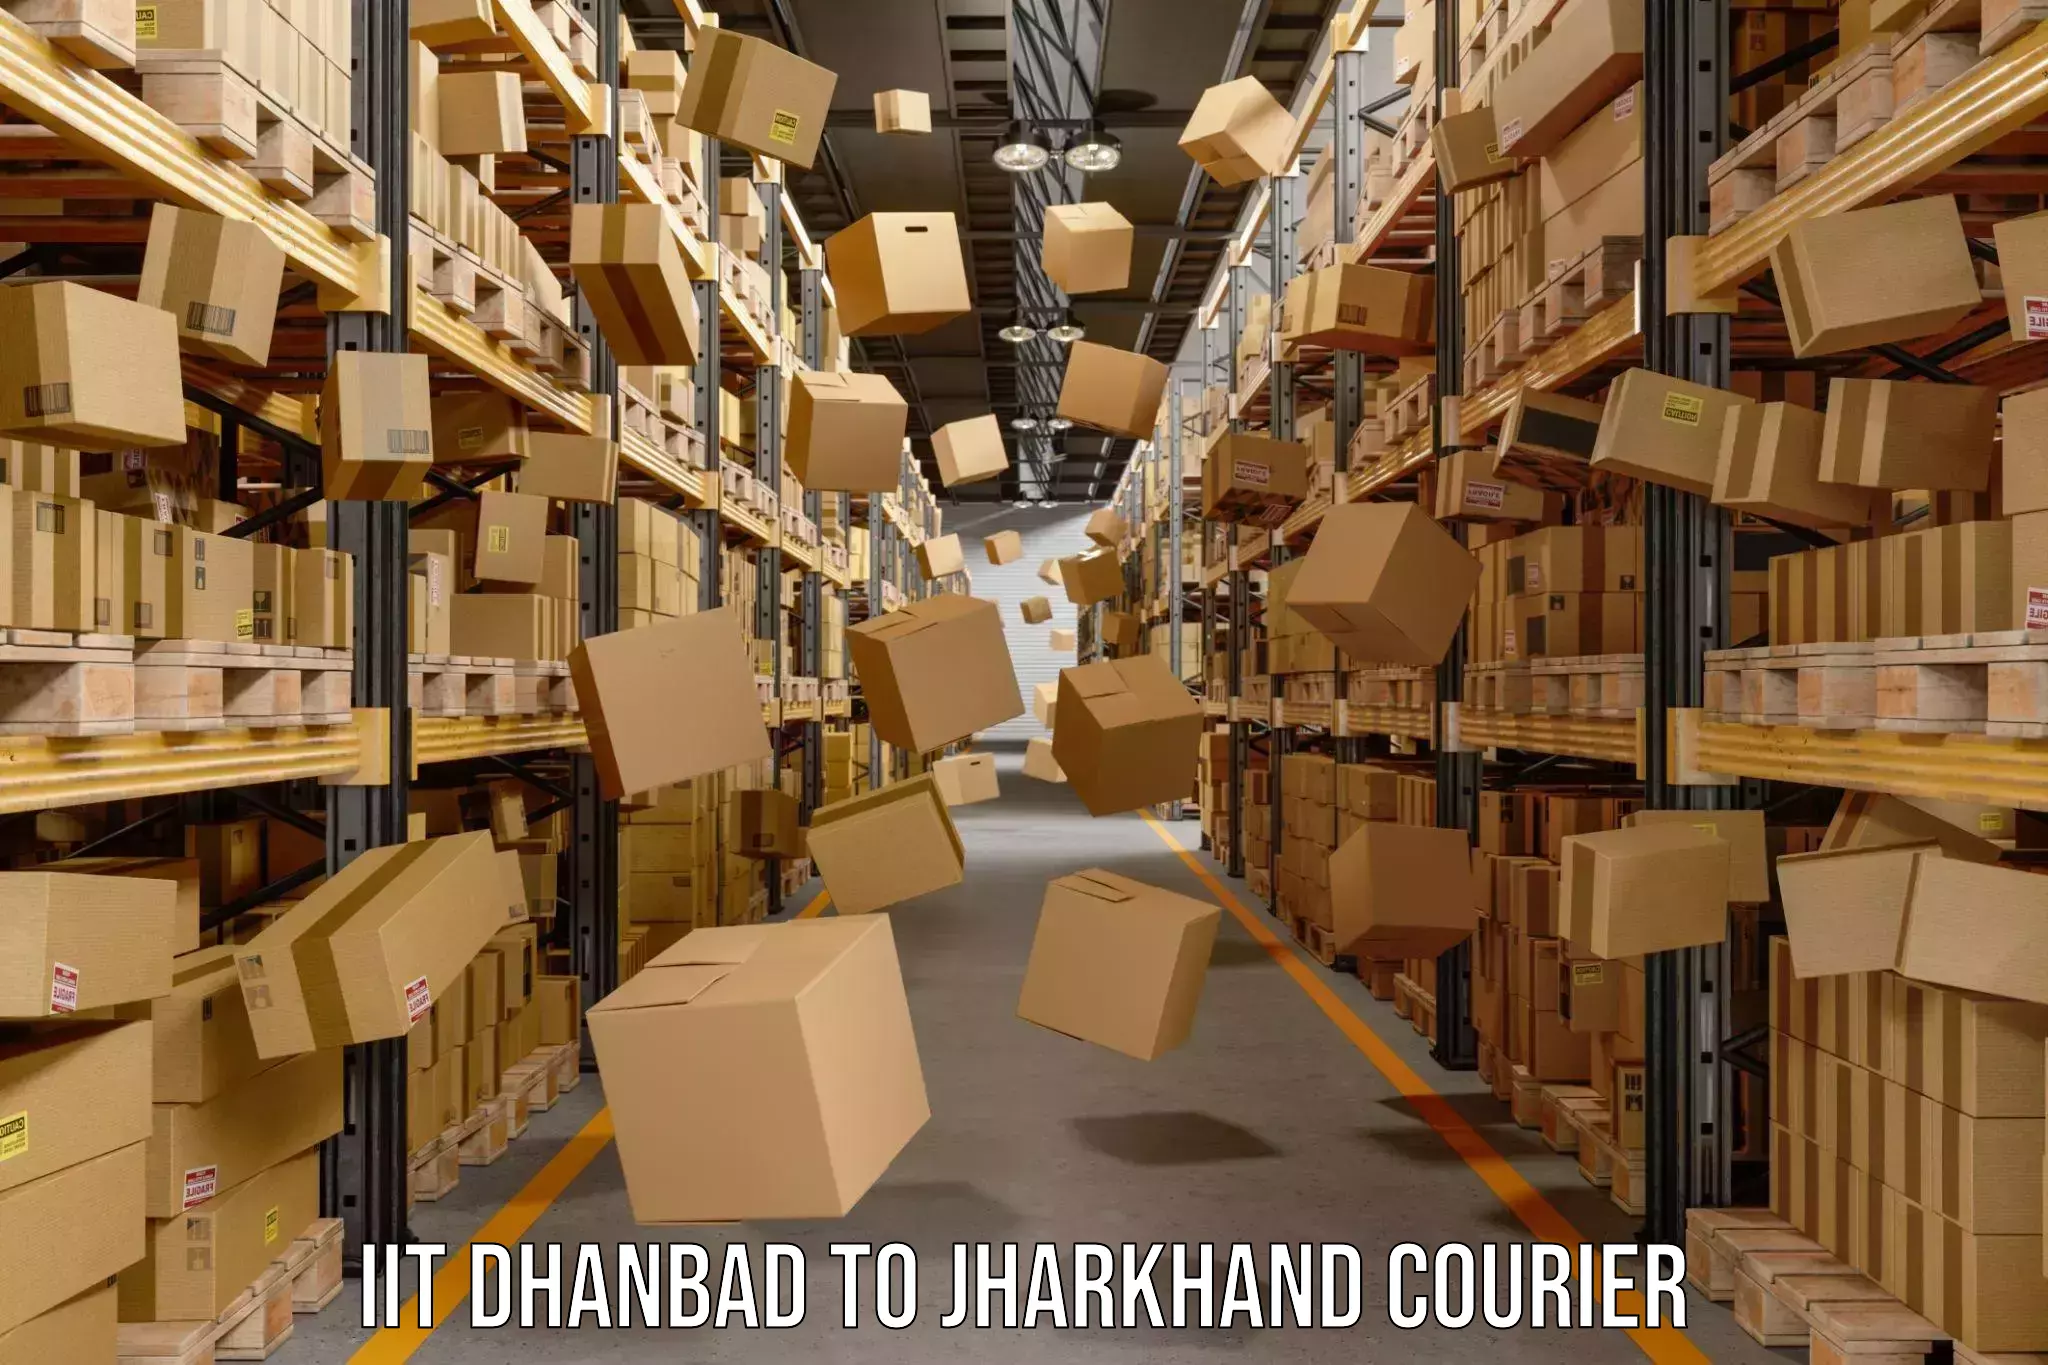 Quality courier services in IIT Dhanbad to Ranchi